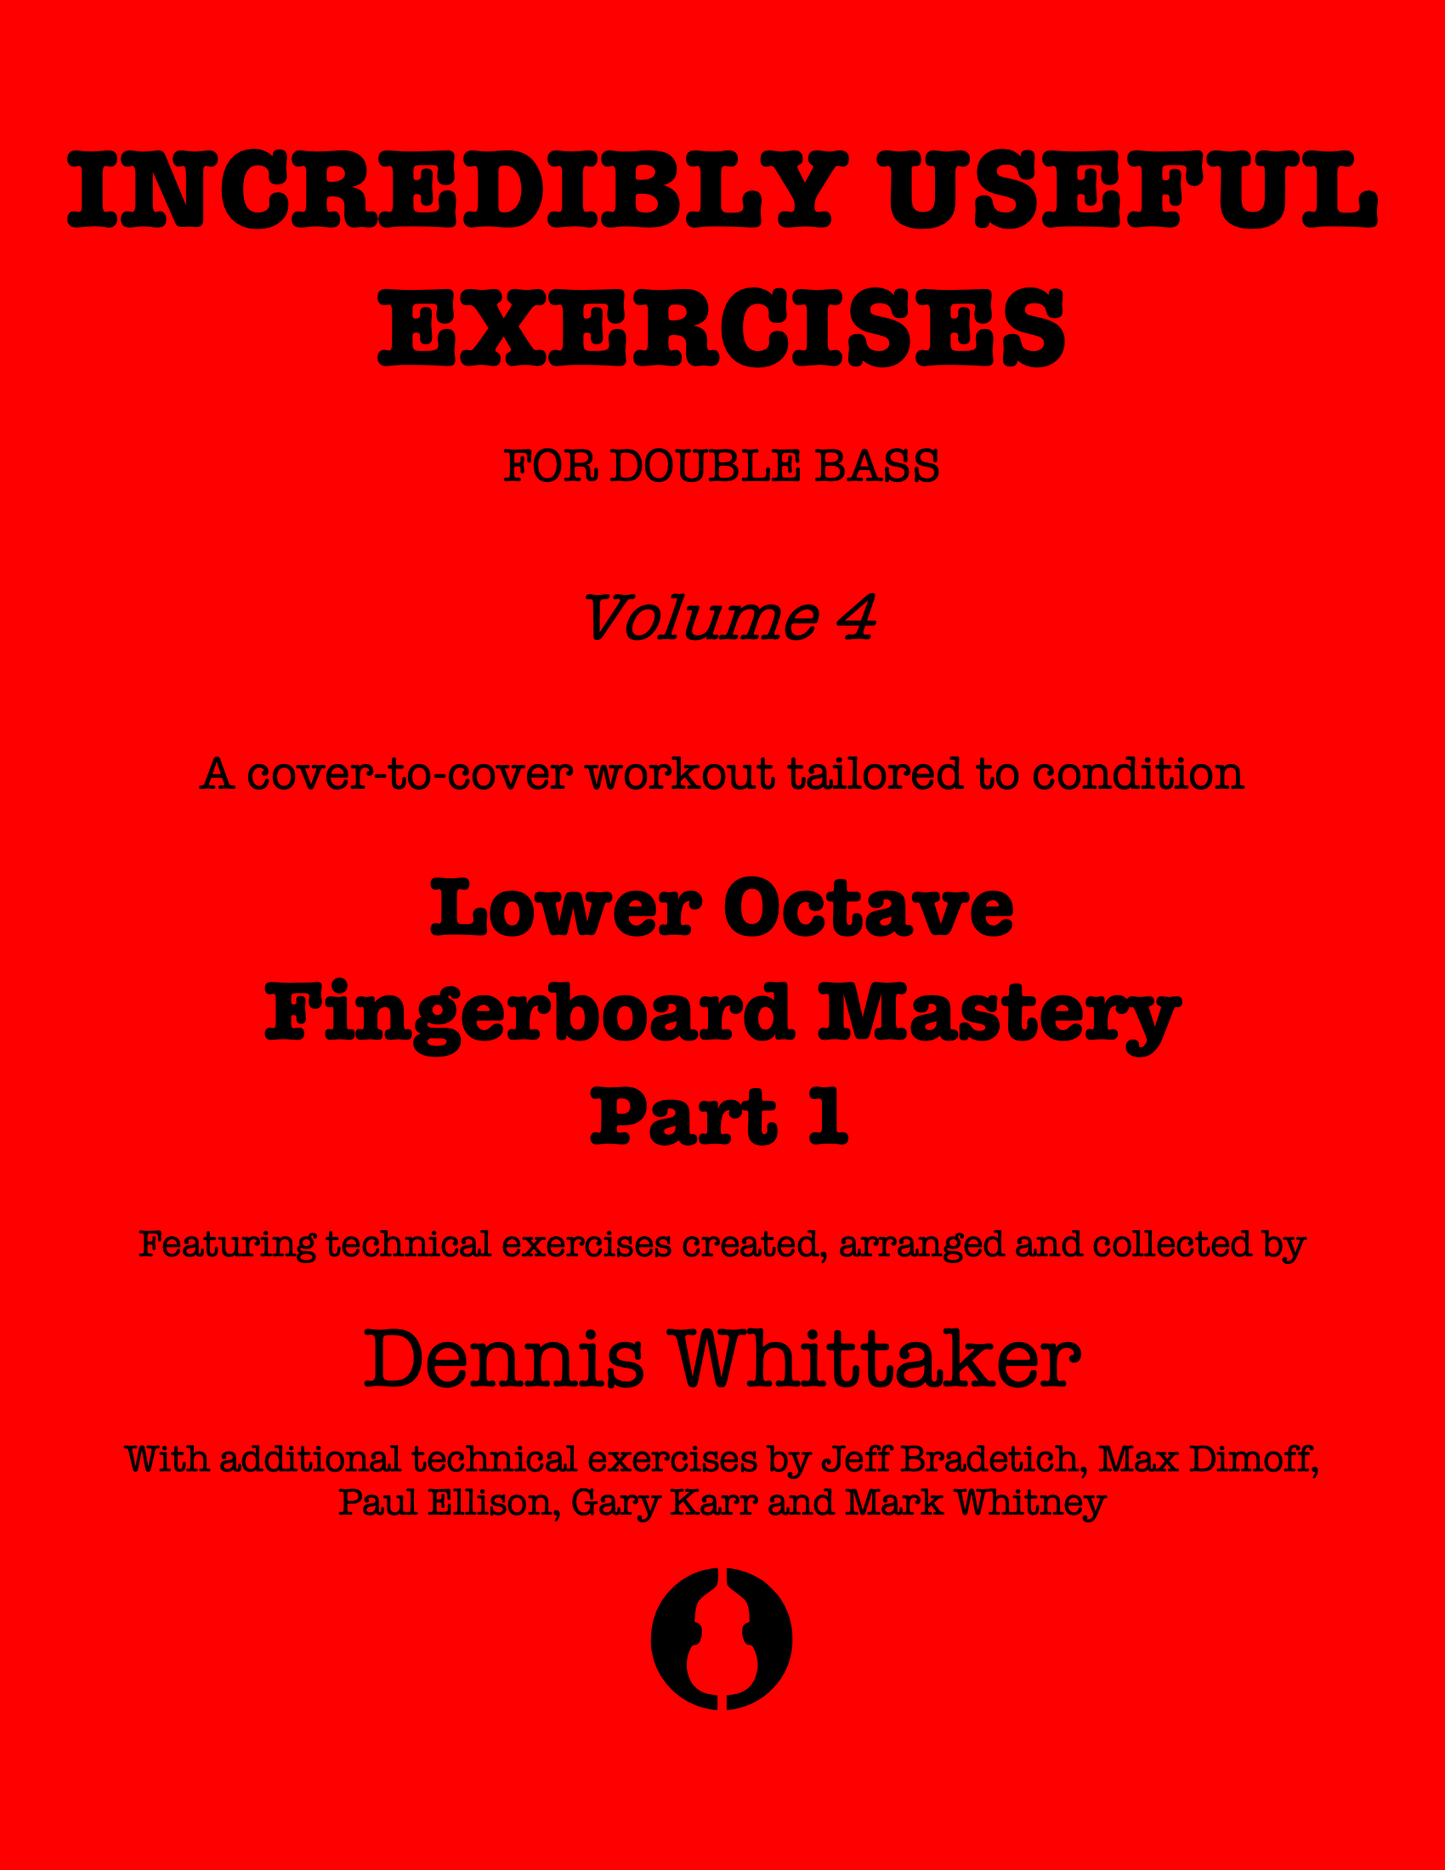 Incredibly Useful Exercises for Double Bass, Vol. 4, Lower Octave Fingerboard Mastery Part 1